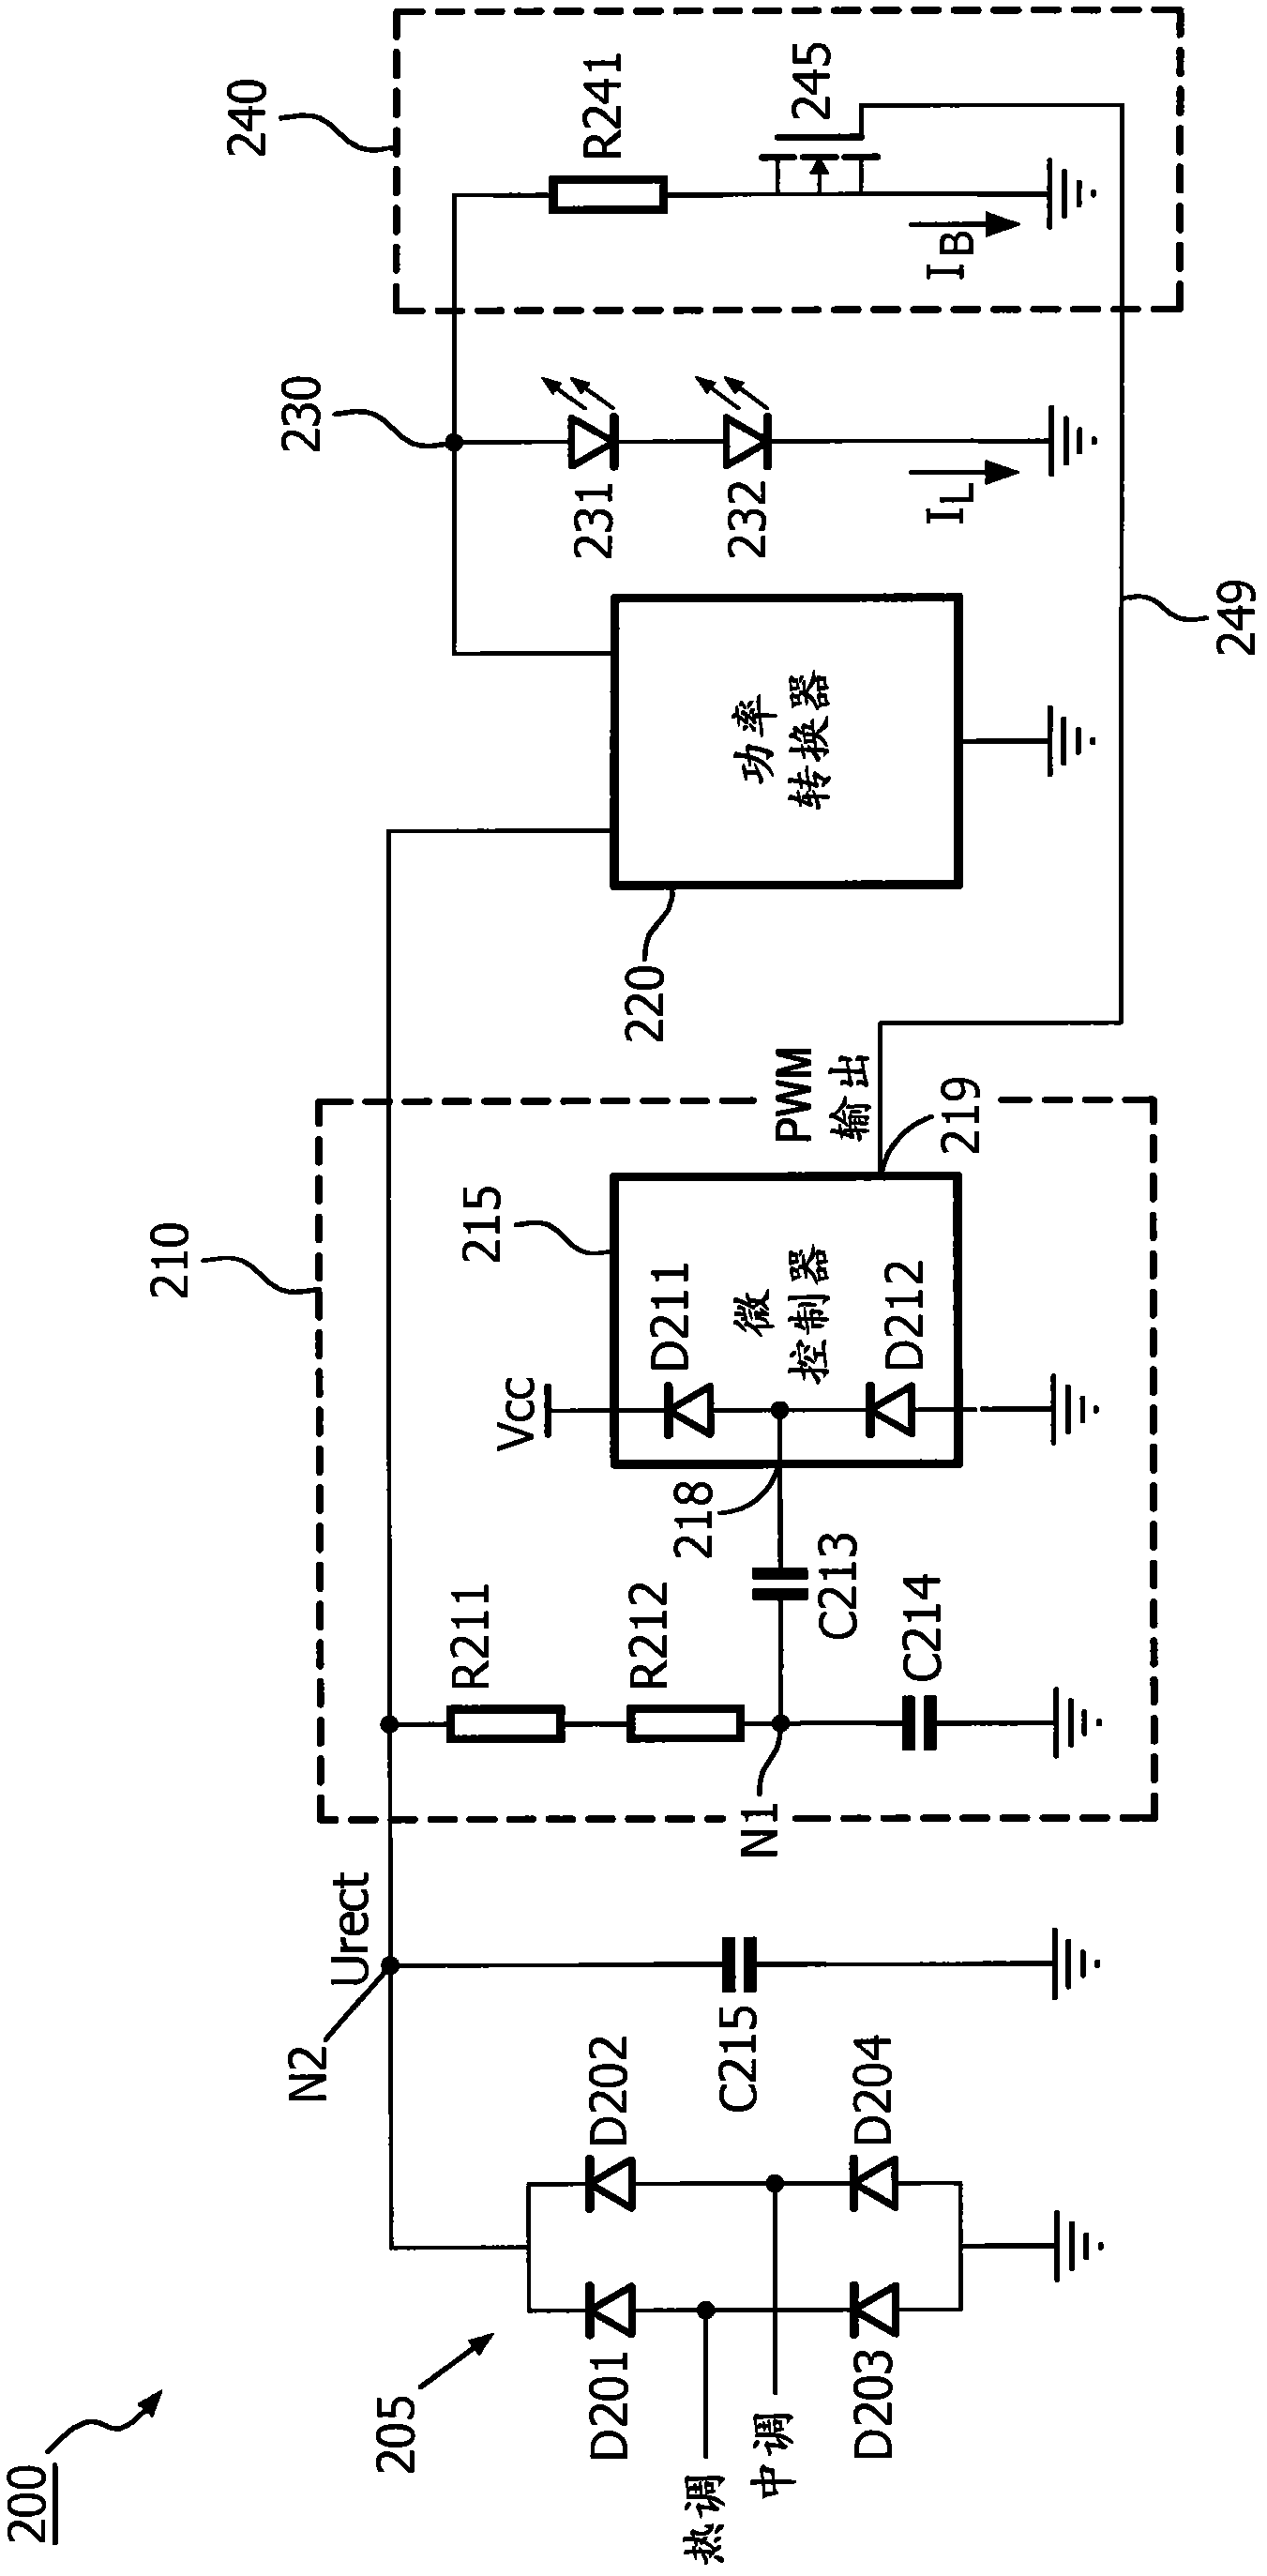 Method and apparatus for increasing dimming range of solid state lighting fixtures